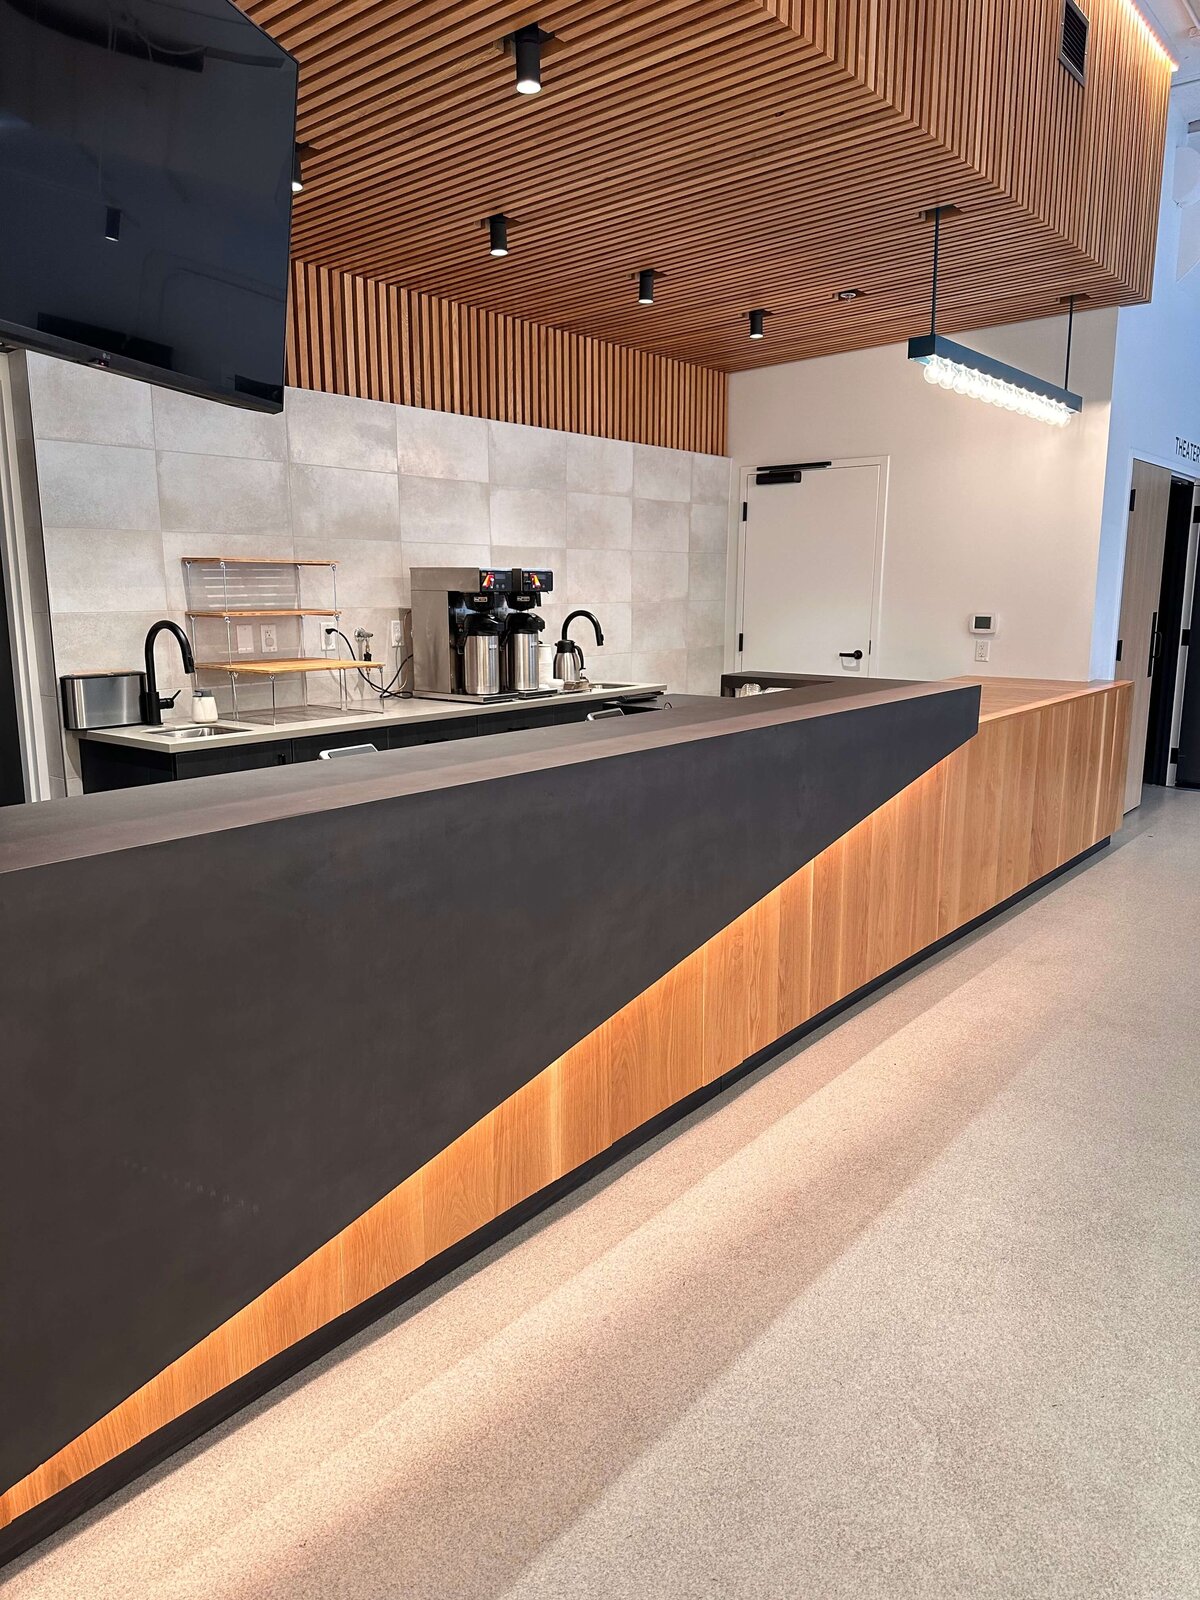 Backlit concrete countertop for concession stand for an event center feature terrazzo floors and fluted wood and accent lighting